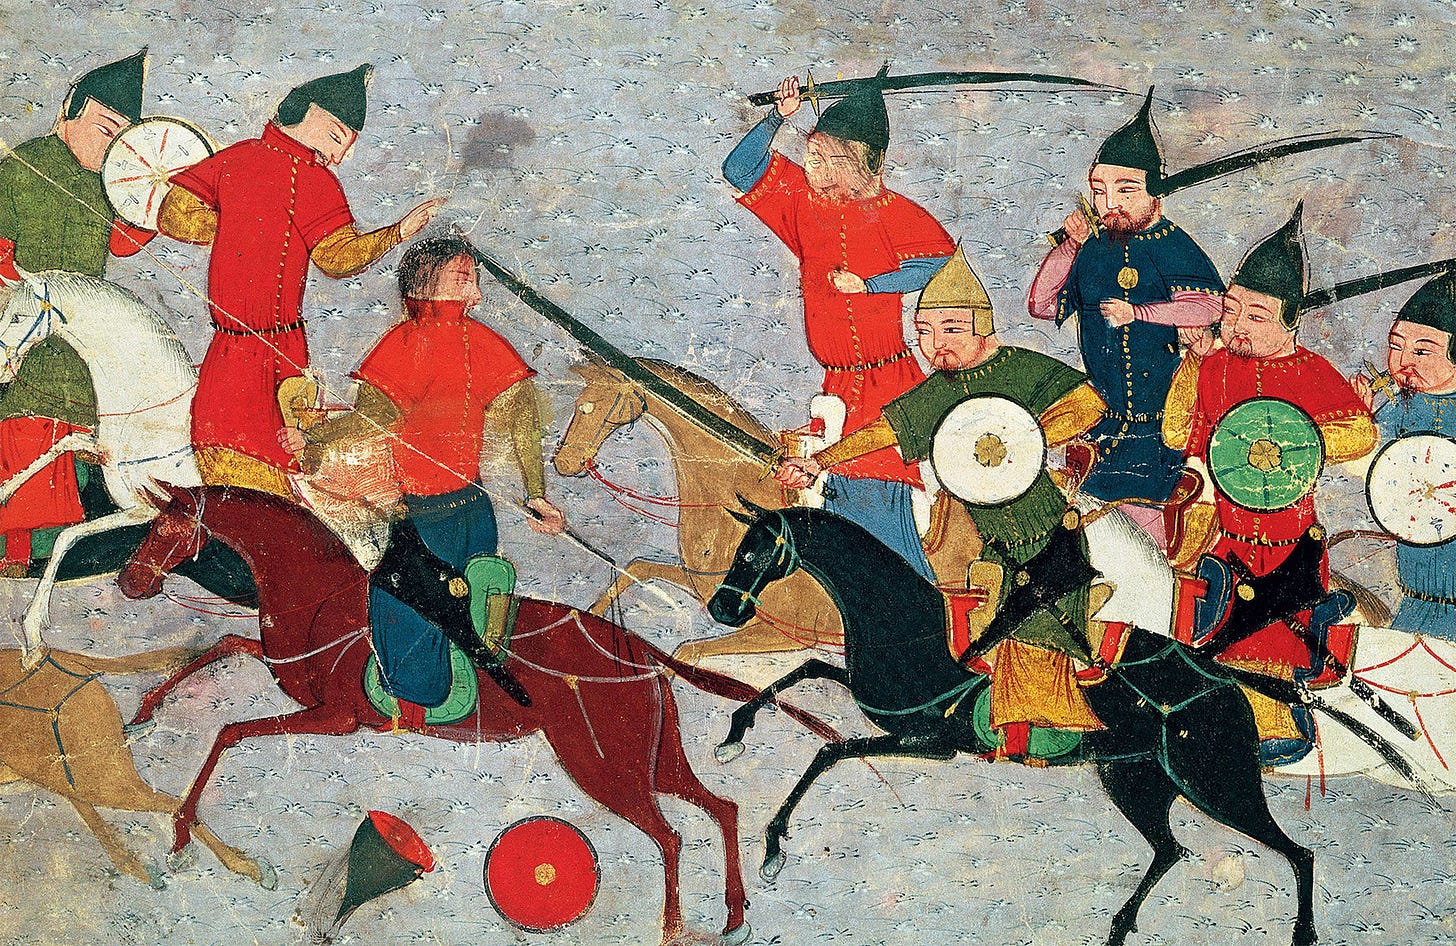 The Mongol Horde: An Unstoppable Force